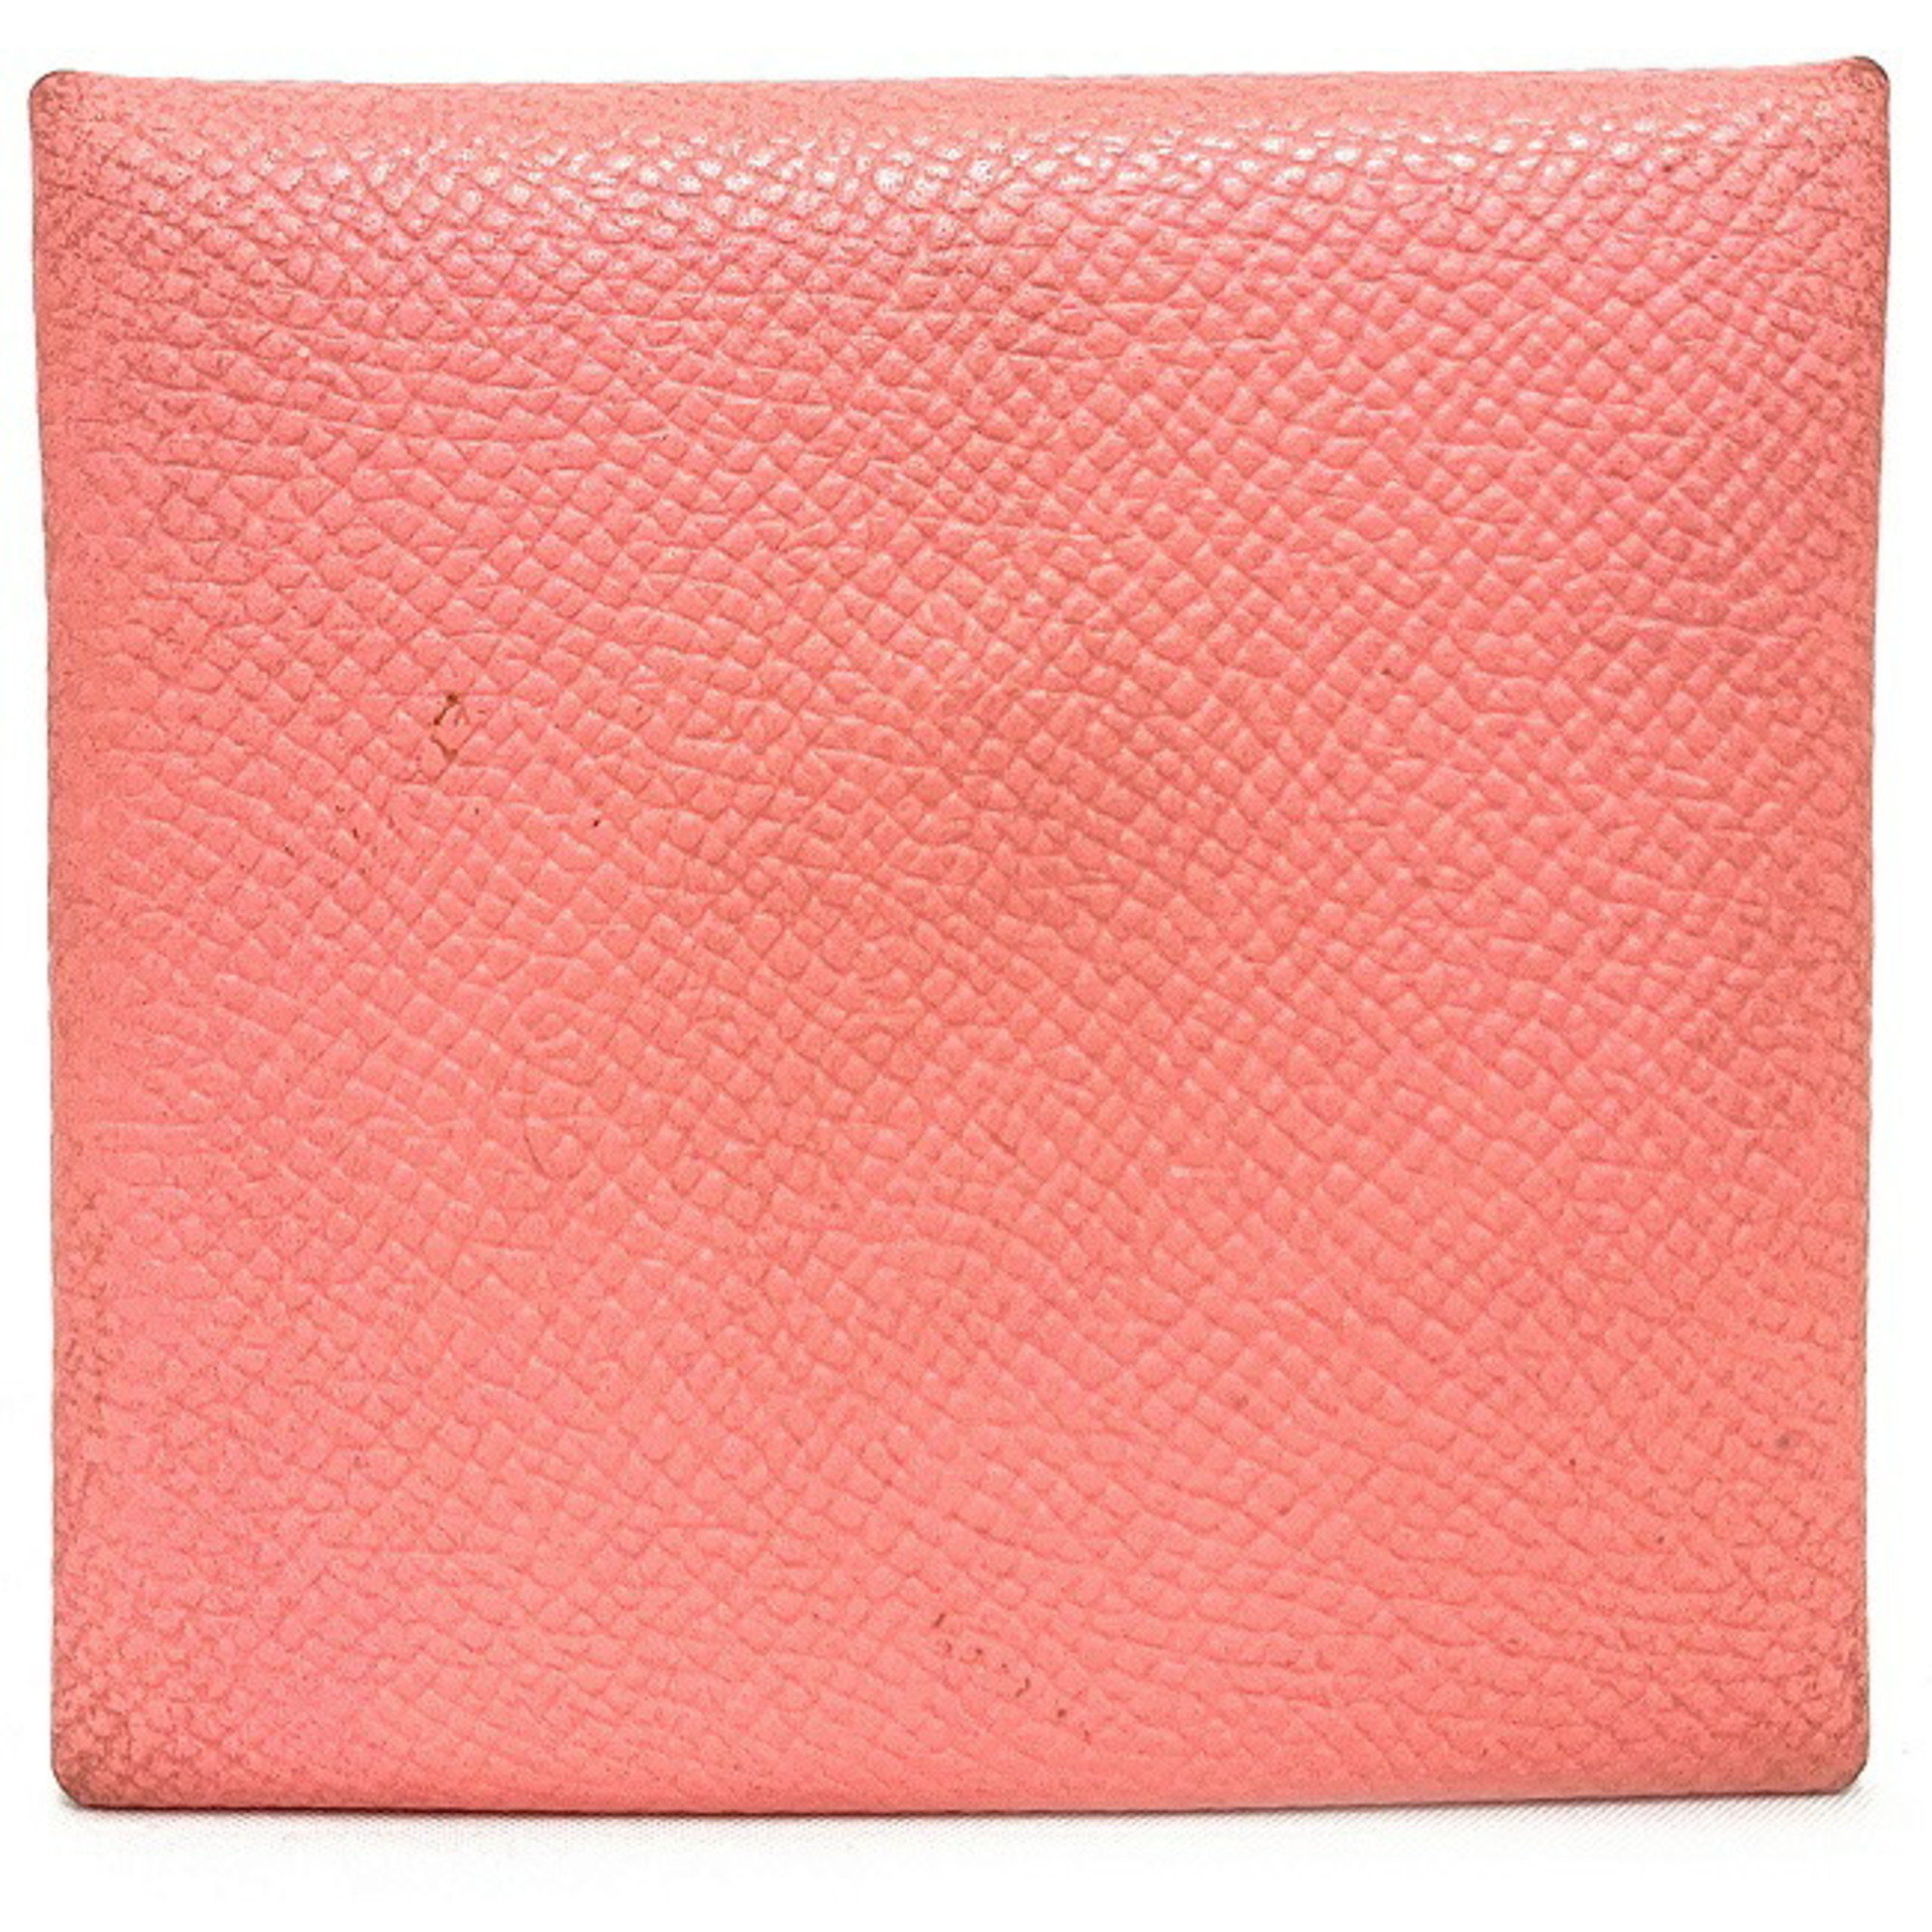 Hermes Bastia Rose Confetti Pink Coin Case Taurillon Clemence □ P HERMES Ladies Purse Leather Square